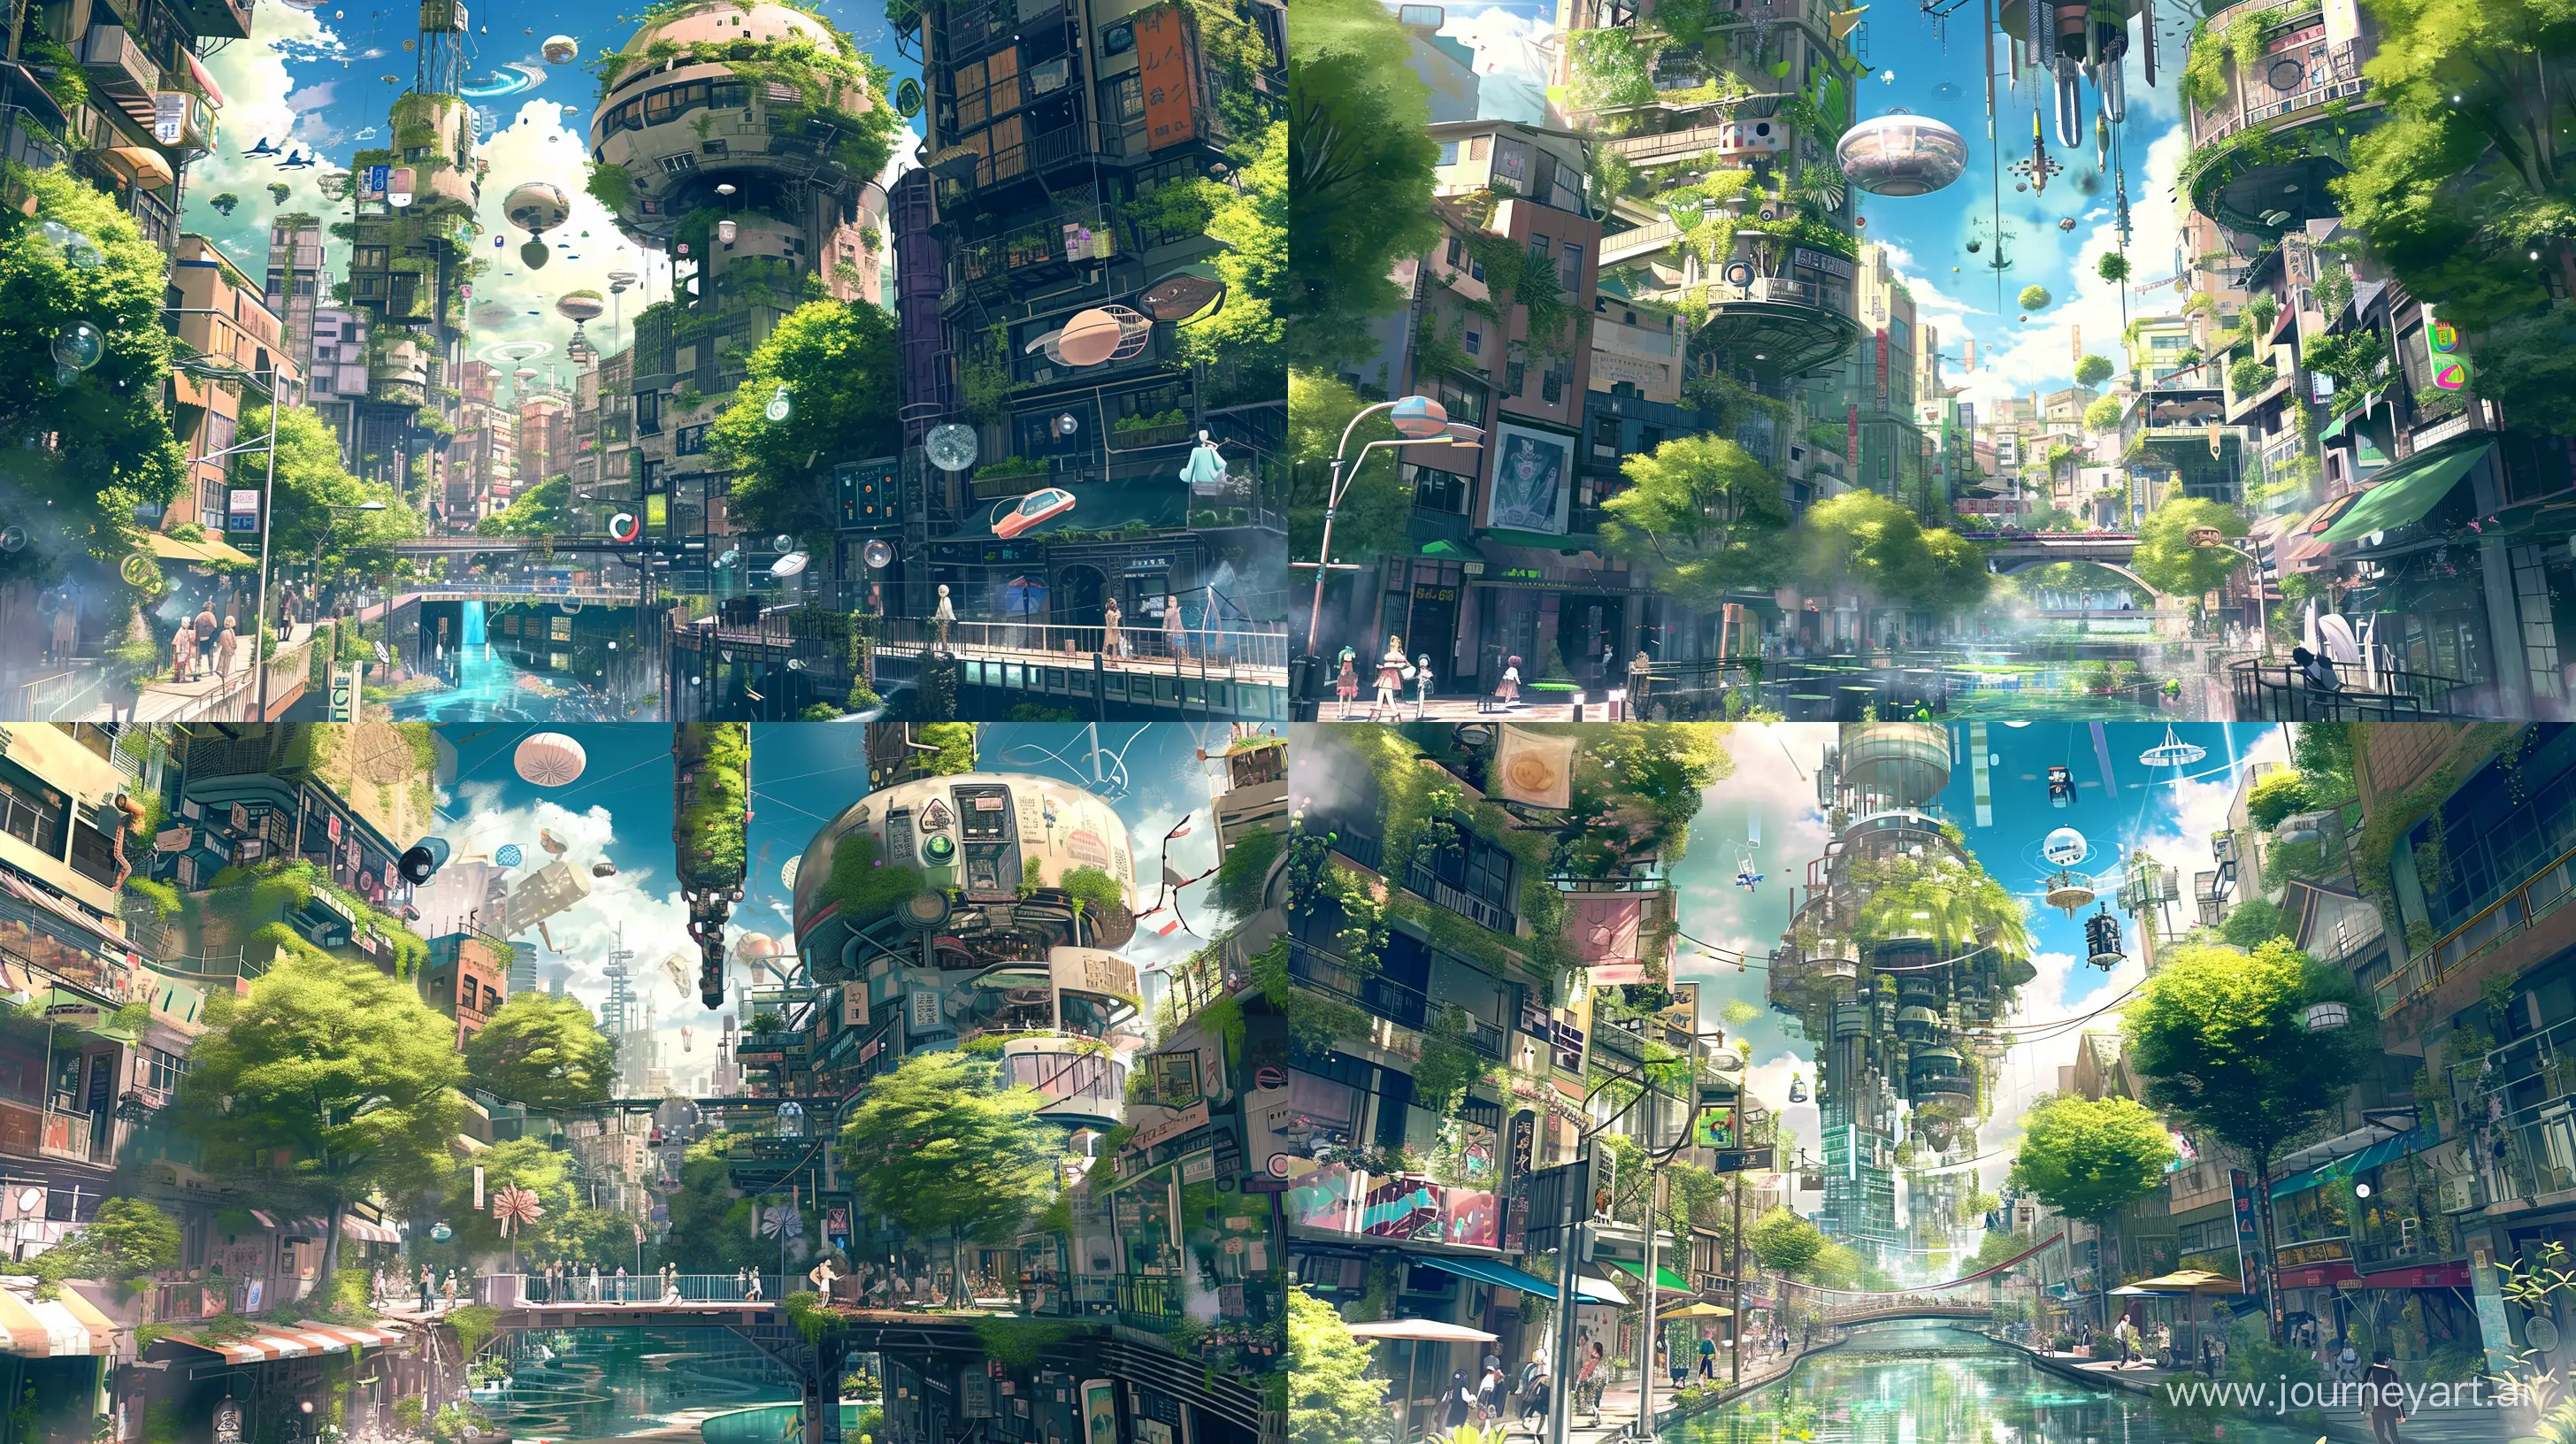 https://i.postimg.cc/7YH71P9t/b4c4b9b81d8507565f3746866680e27e-out-out-out.jpg the image depicts a fantastical anime cityscape with a river running through the middle, the buildings are covered in plants and there are various objects floating in the sky, the scene also features people walking around and enjoying the unique environment, --ar 16:9